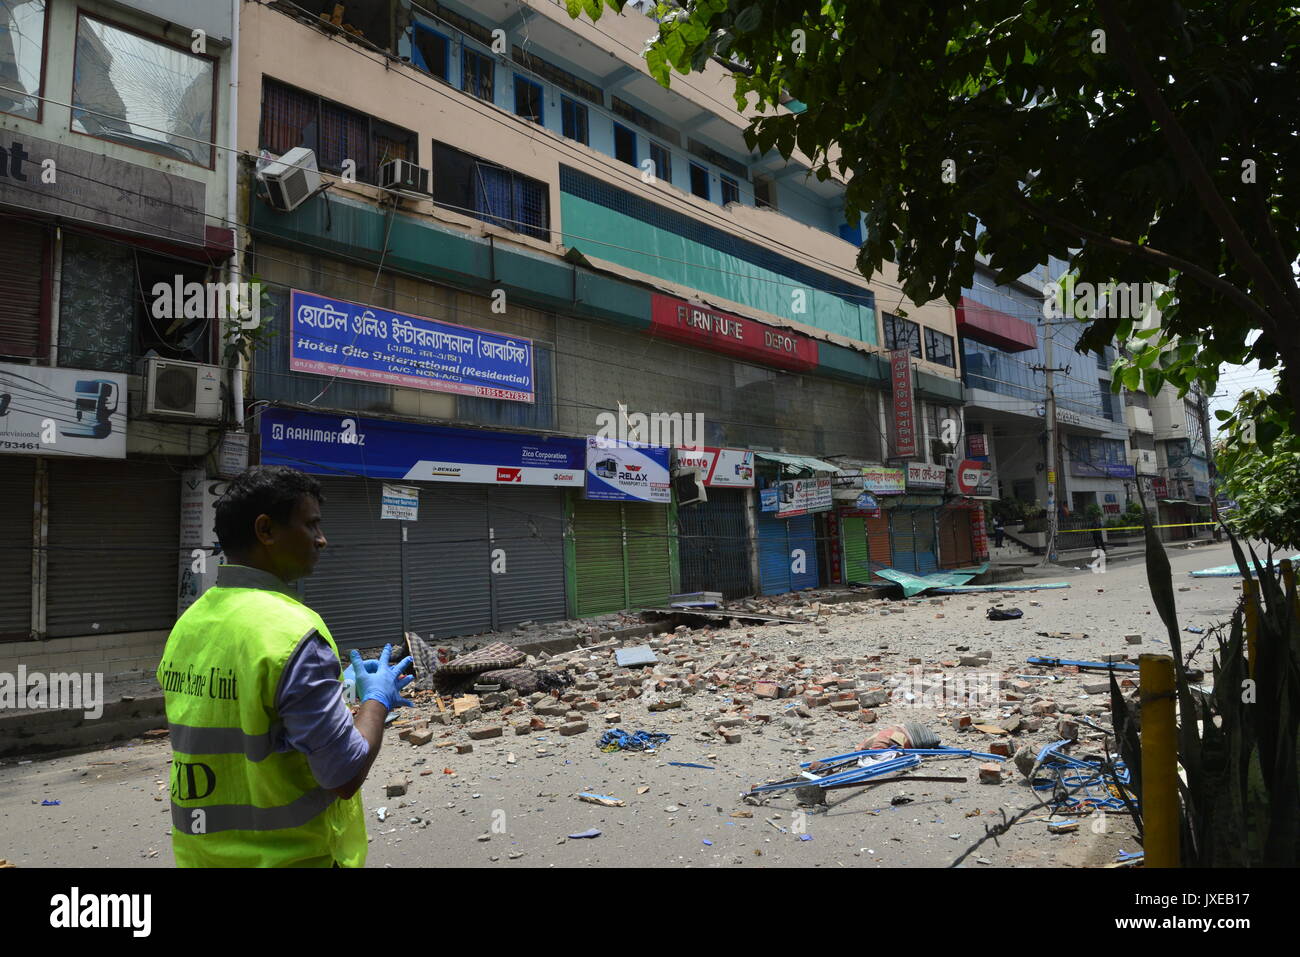 Dhaka, Bangladesh. 15th Aug, 2017. Bangladeshi crime scene investigators collect evidence from a street after part of a hotel building collapsed following a raid on a militant hideout in Dhaka on August 15, 2017. A suspected militant has been killed in an operation at a hotel in Dhaka's Panthapath area where lawmen conducted a raid suspecting a militant hideout this morning at Hotel Olio International in Dhaka, Bangladesh. Credit: Mamunur Rashid/Alamy Live News Stock Photo